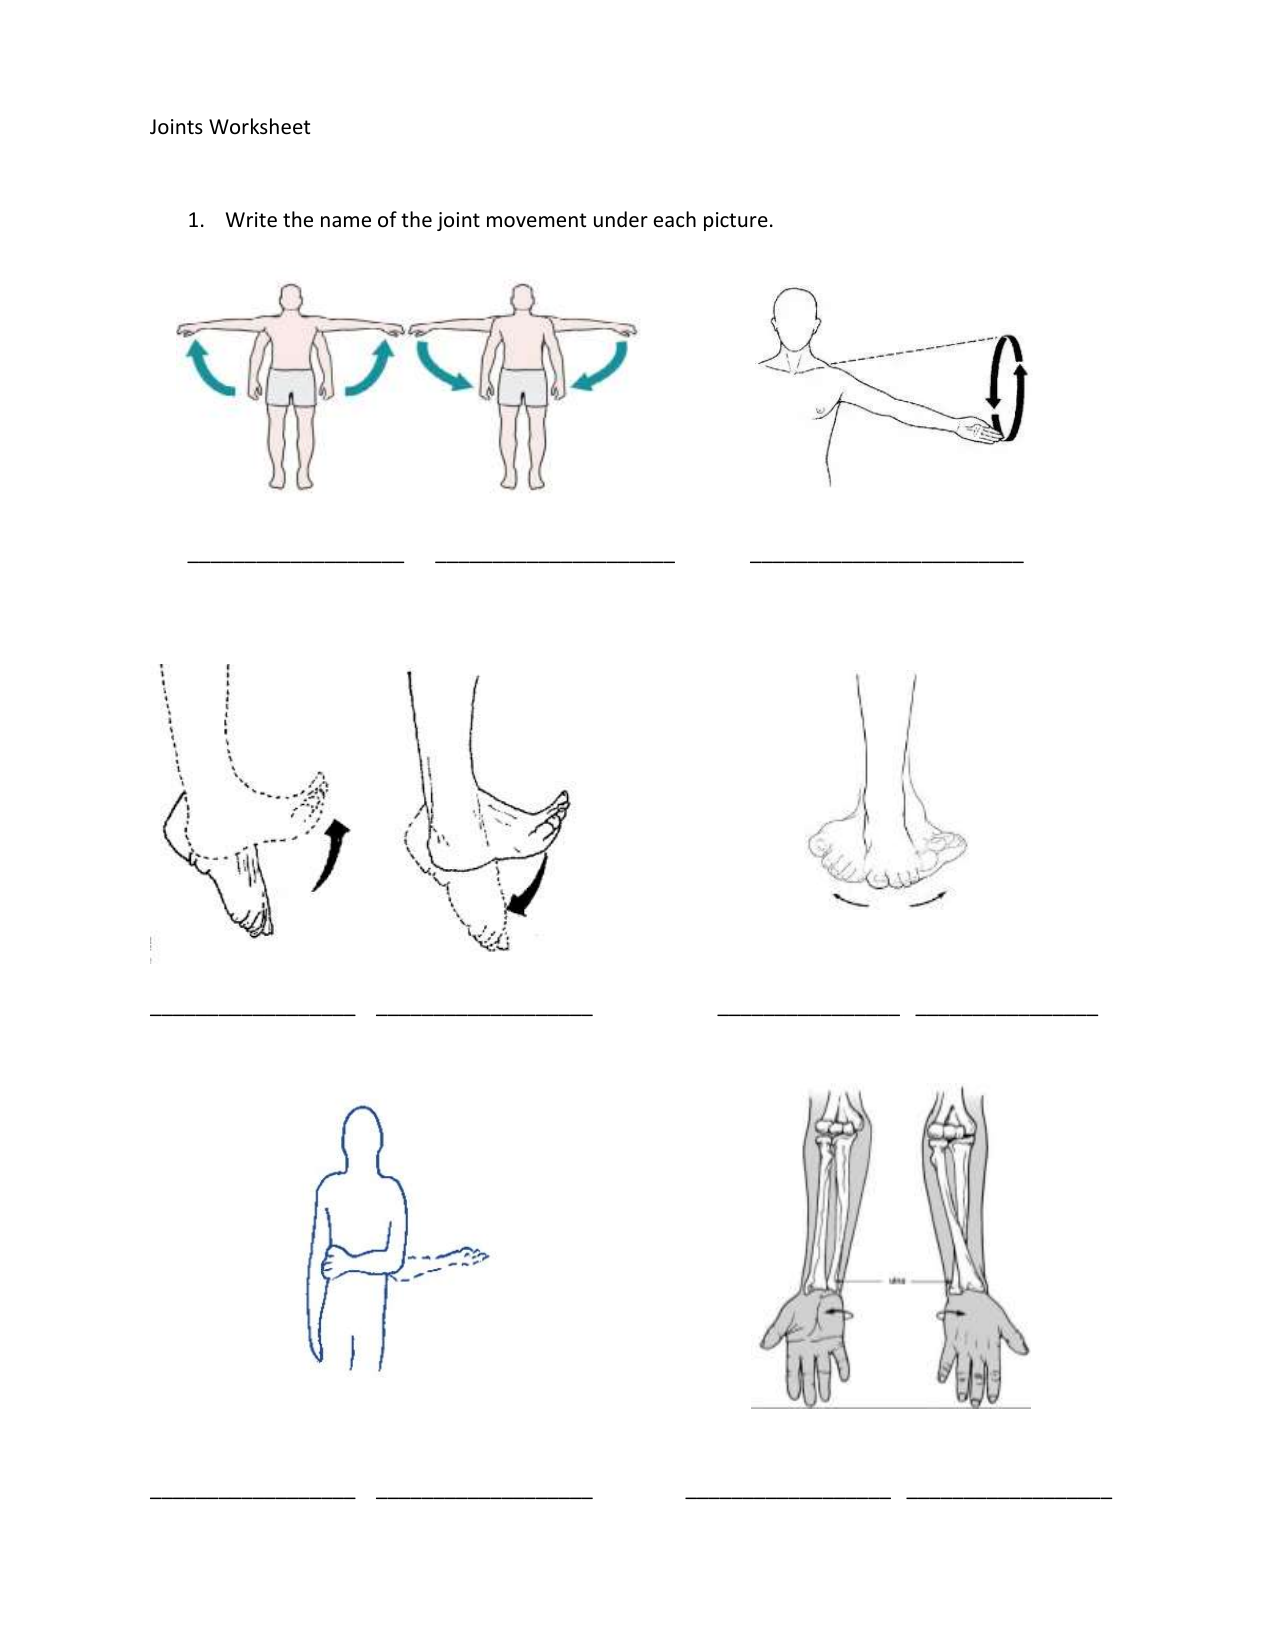 Joints Worksheet Intended For Joints And Movement Worksheet